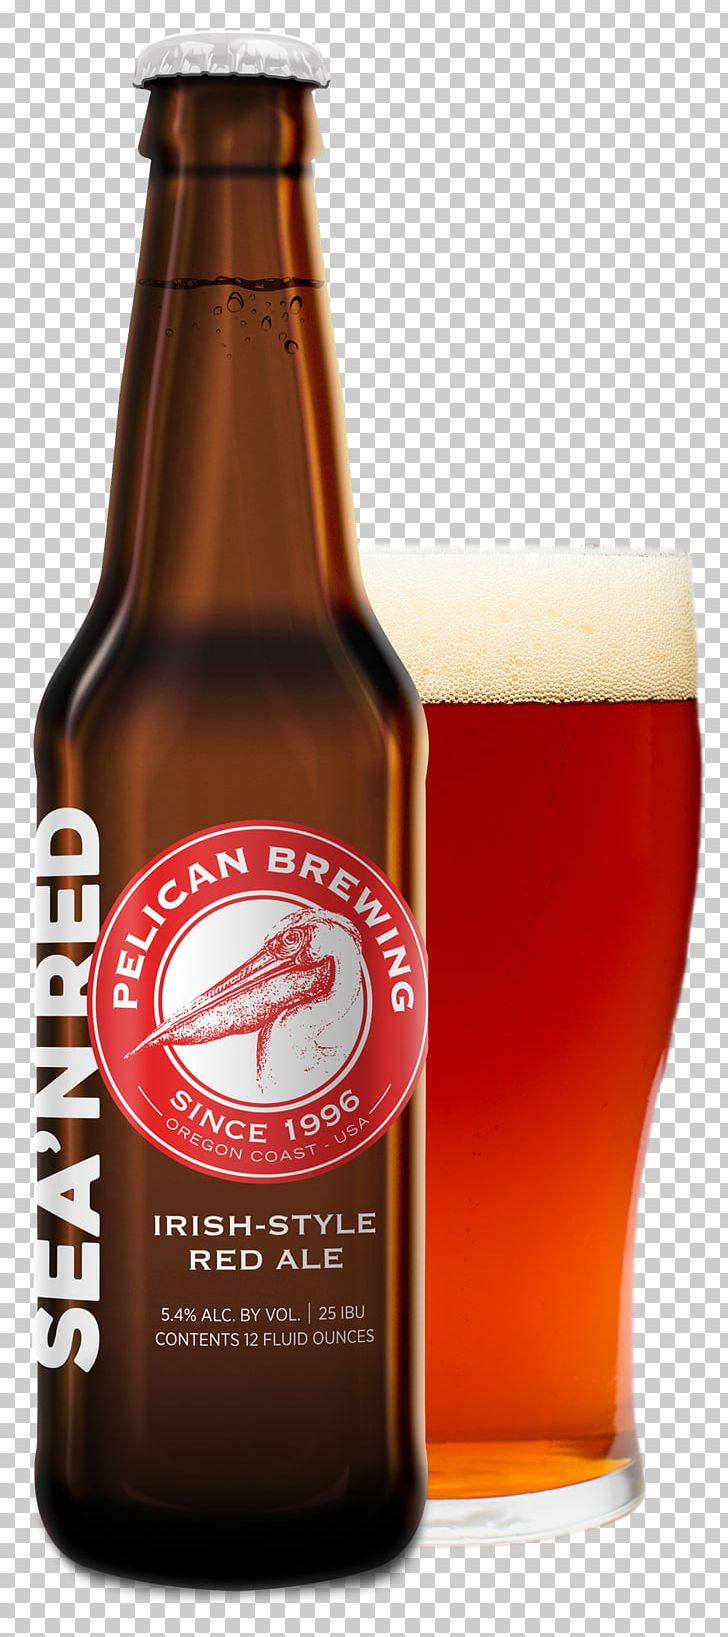 India Pale Ale Pelican Brewing Beer PNG, Clipart, Alcoholic Beverage, Ale, Amstel Brewery, Beer, Beer Bottle Free PNG Download